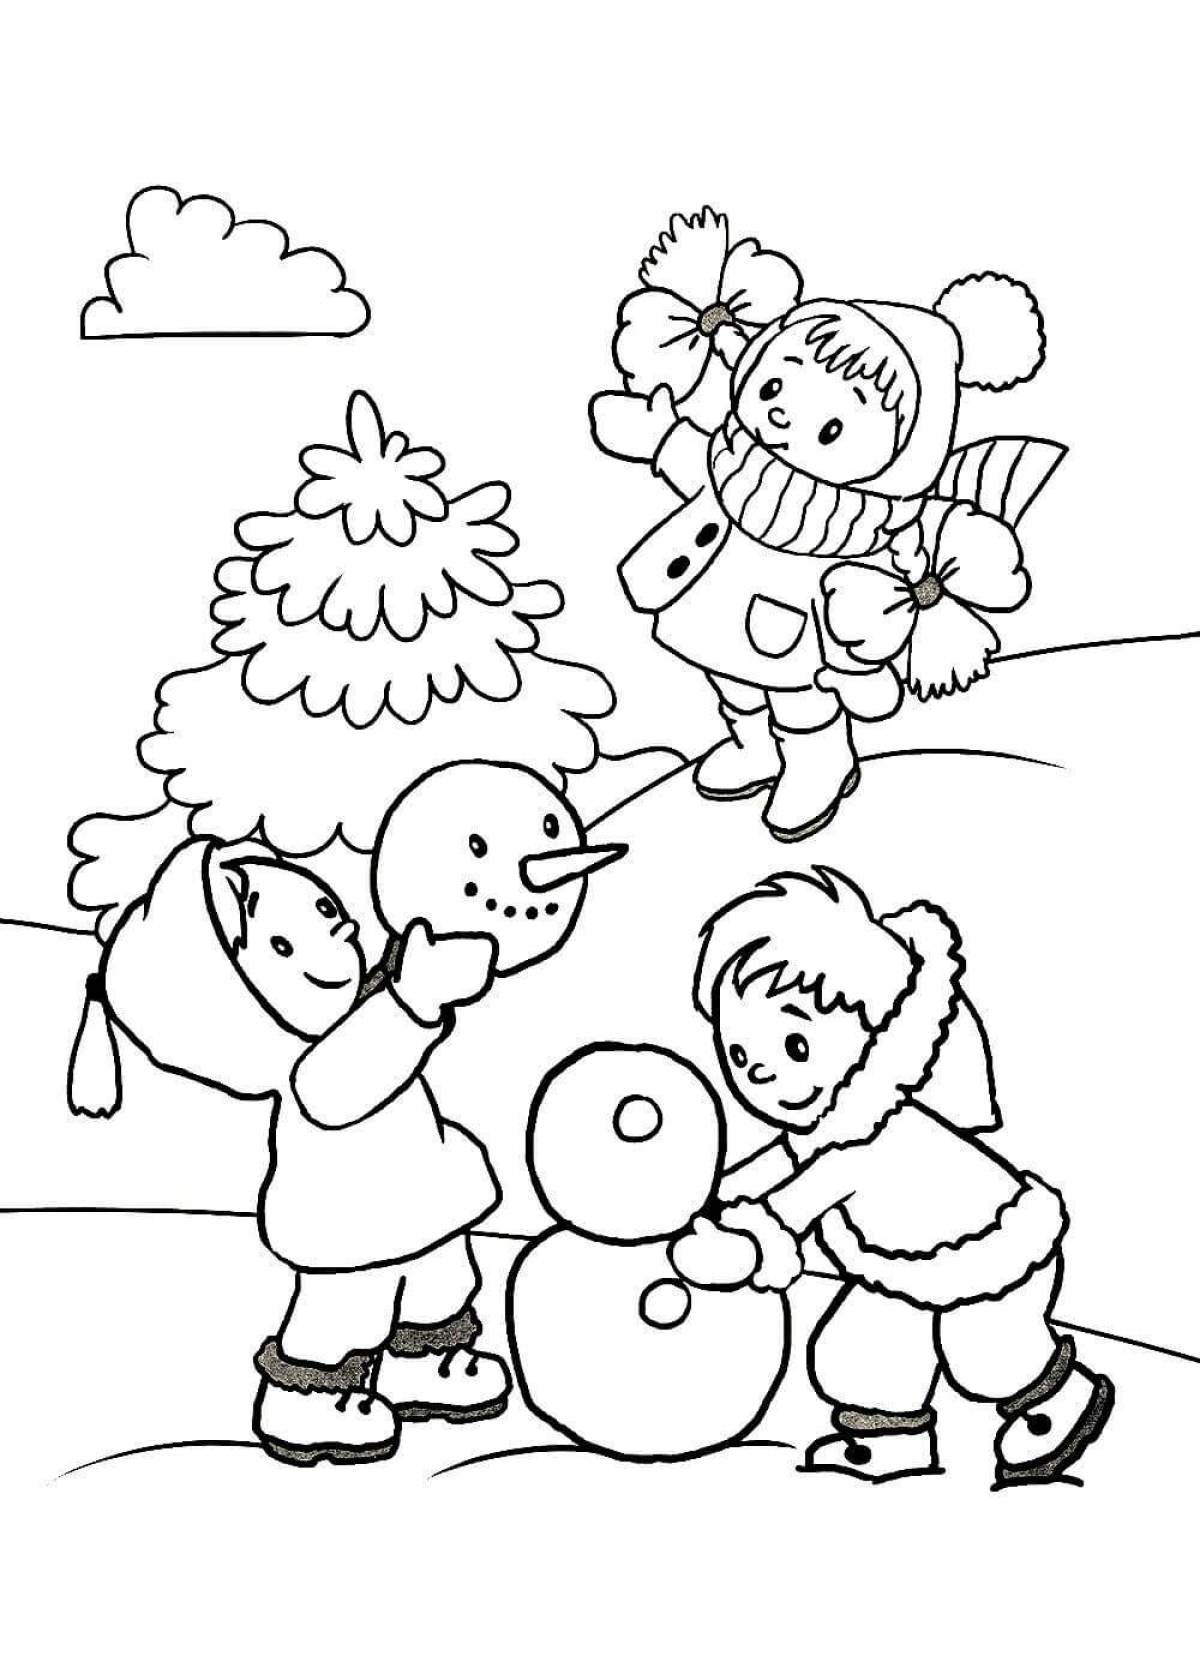 Playful winter coloring for children 10 years old